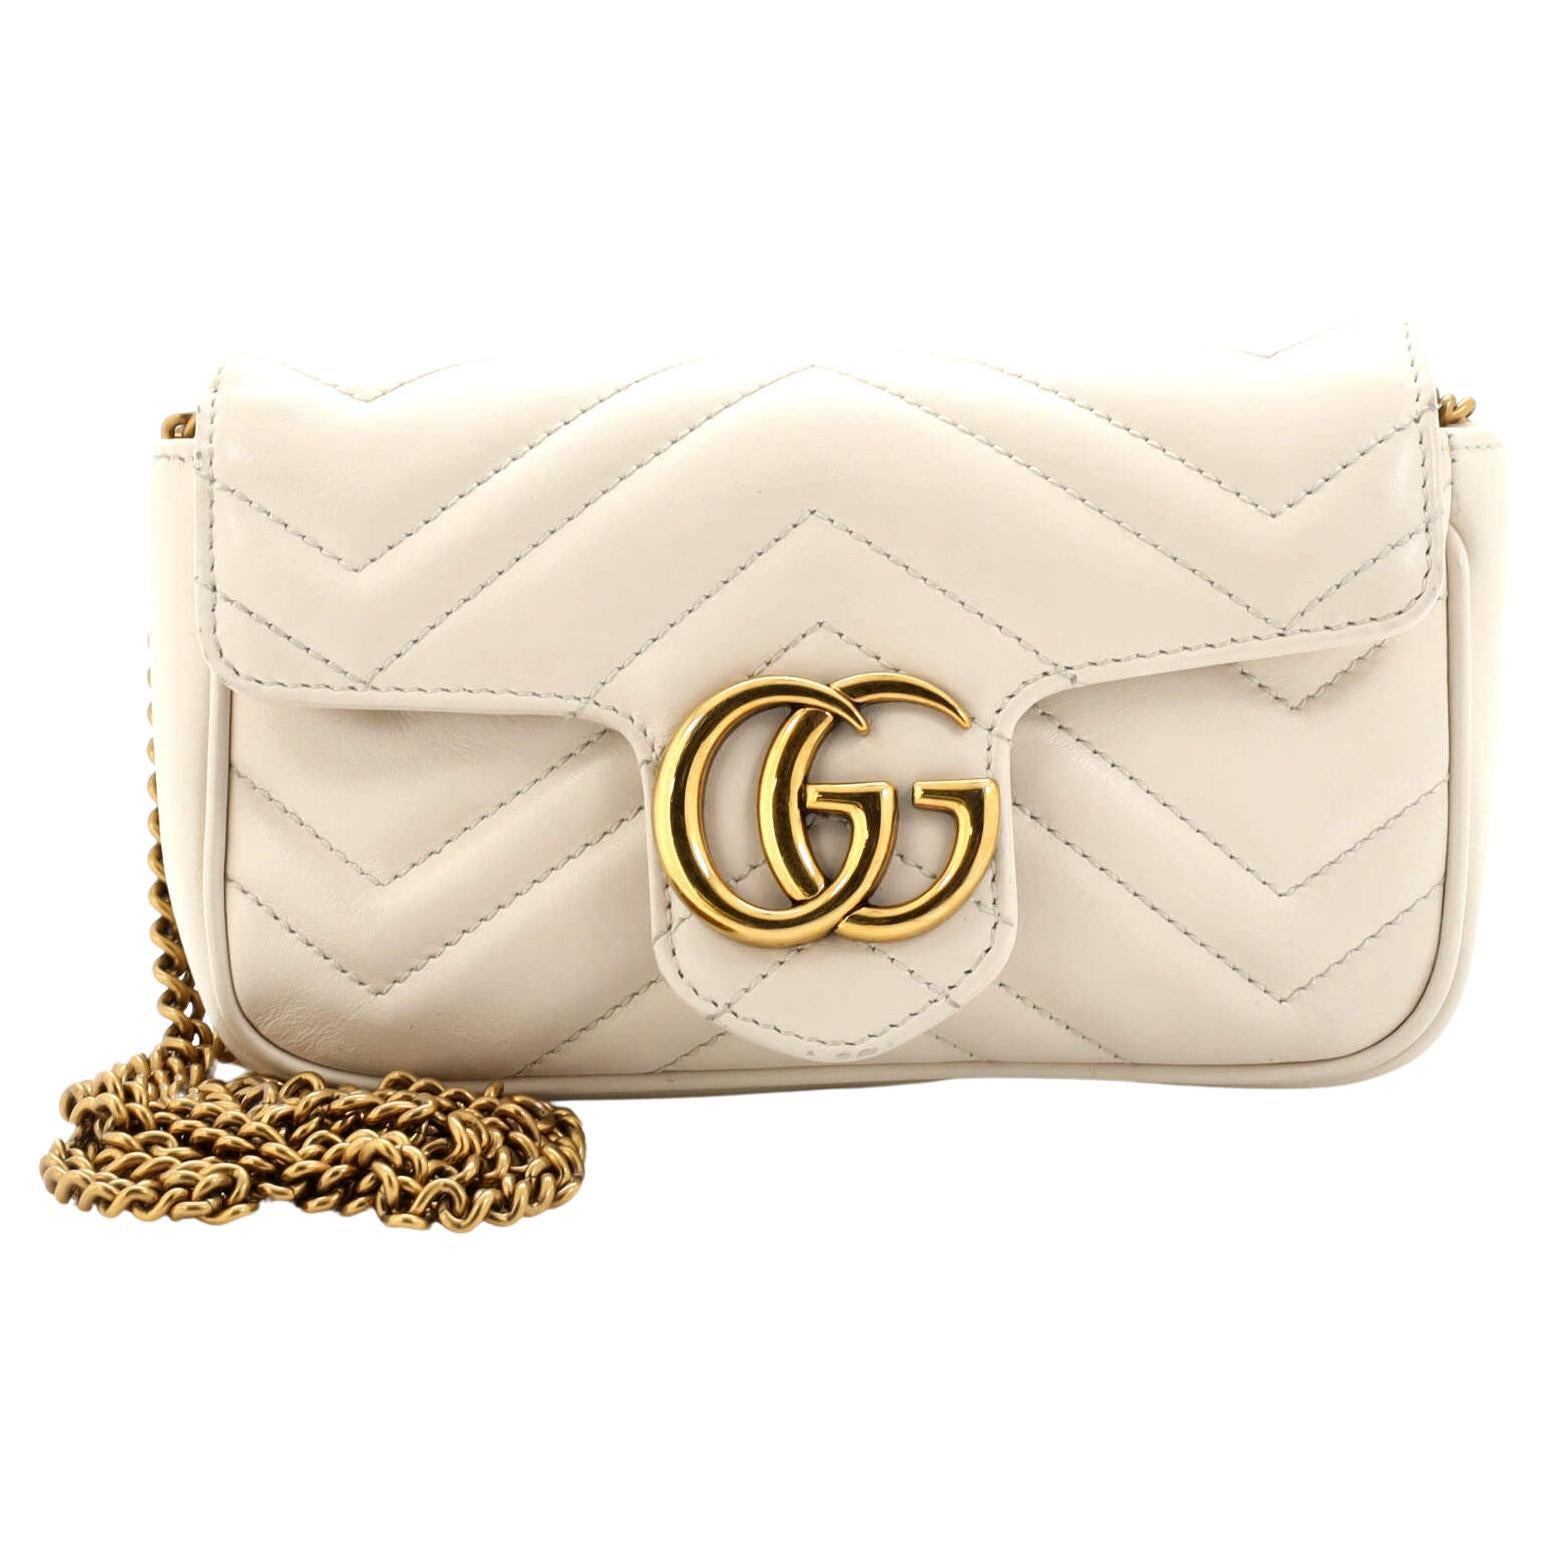 AUTHENTICATE A GUCCI HANDBAG IN 4 STEPS! / Is your Gucci handbag real or  fake?! 